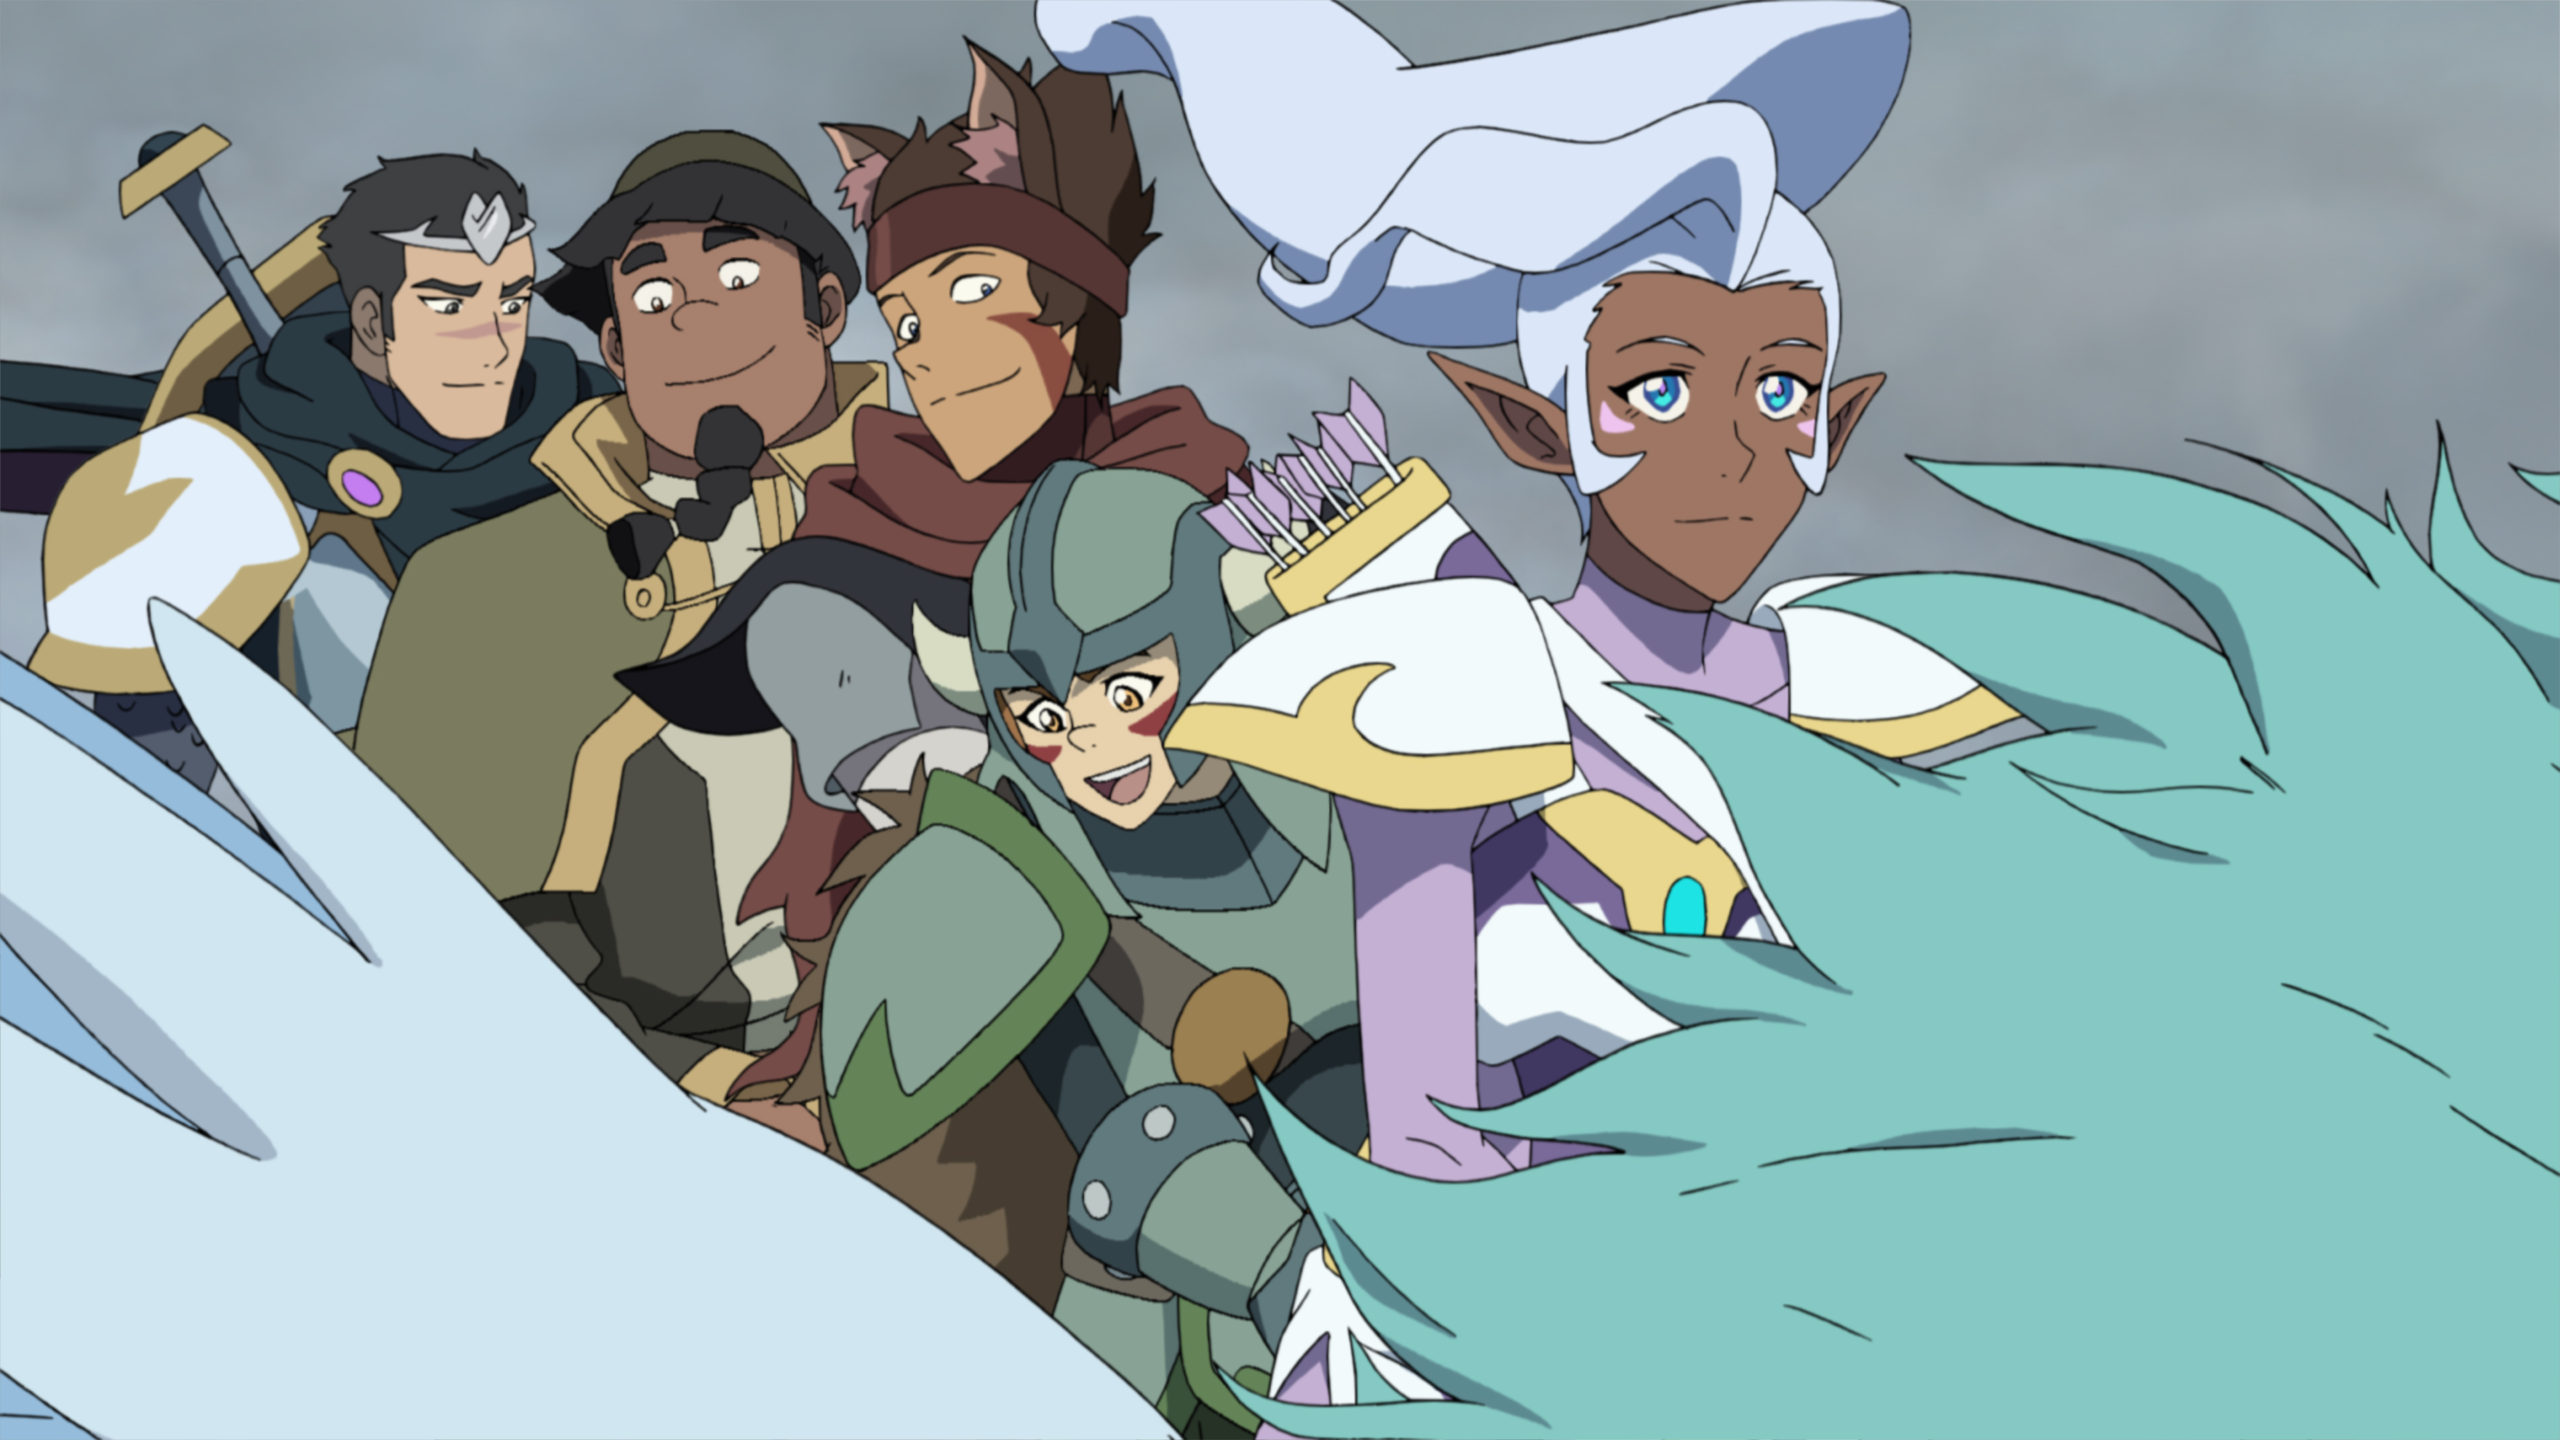 Team Voltron embarks on a fictional DnD style quest. 